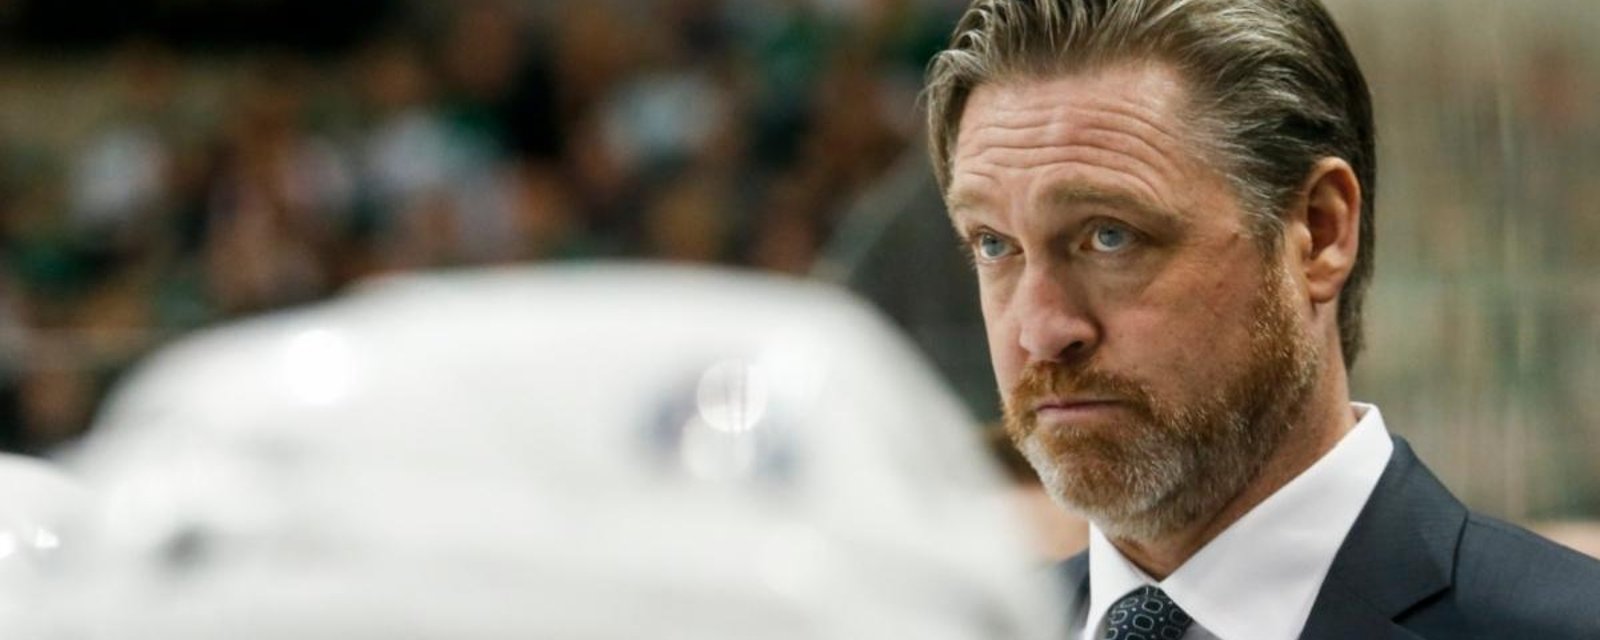 Patrick Roy beat out for international coaching job by former NHL head coach.